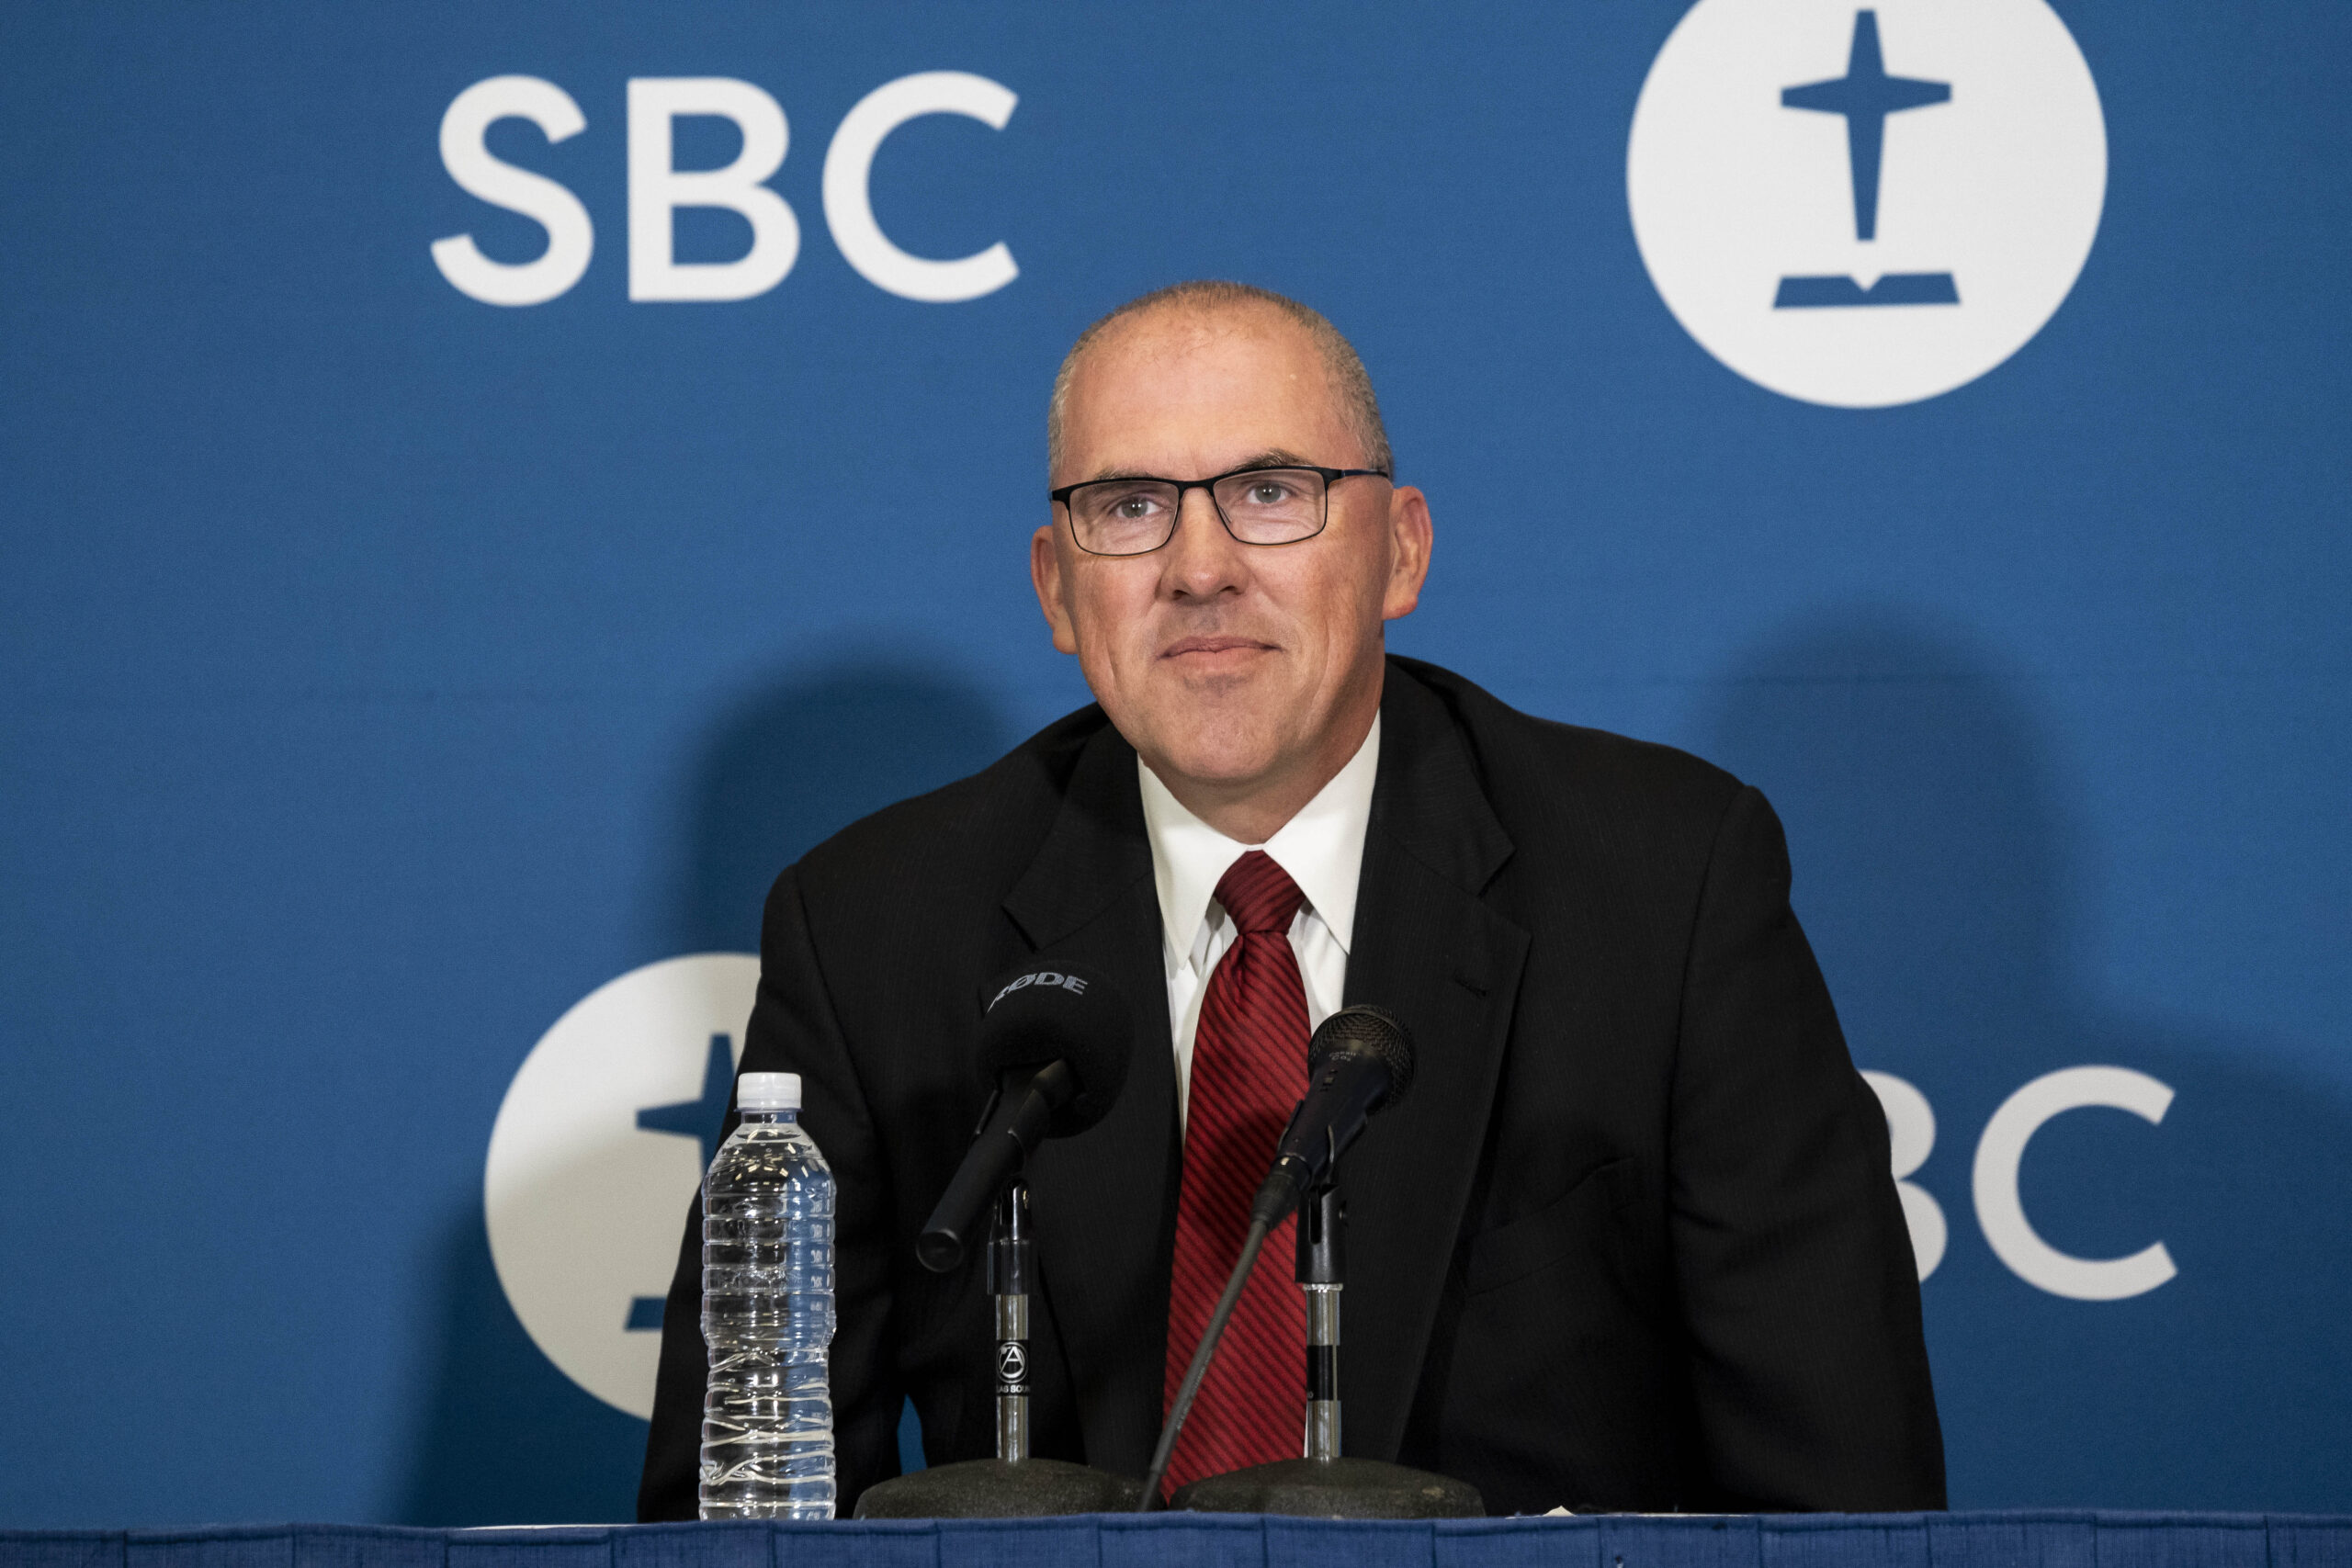 Newly elected SBC president Bart Barber speaks during a press conference at the Southern Baptist Convention annual meeting, held at the Anaheim Convention Center in Anaheim, California, on Wednesday, June 15, 2022. Photo by Justin L. Stewart/Religion News Service